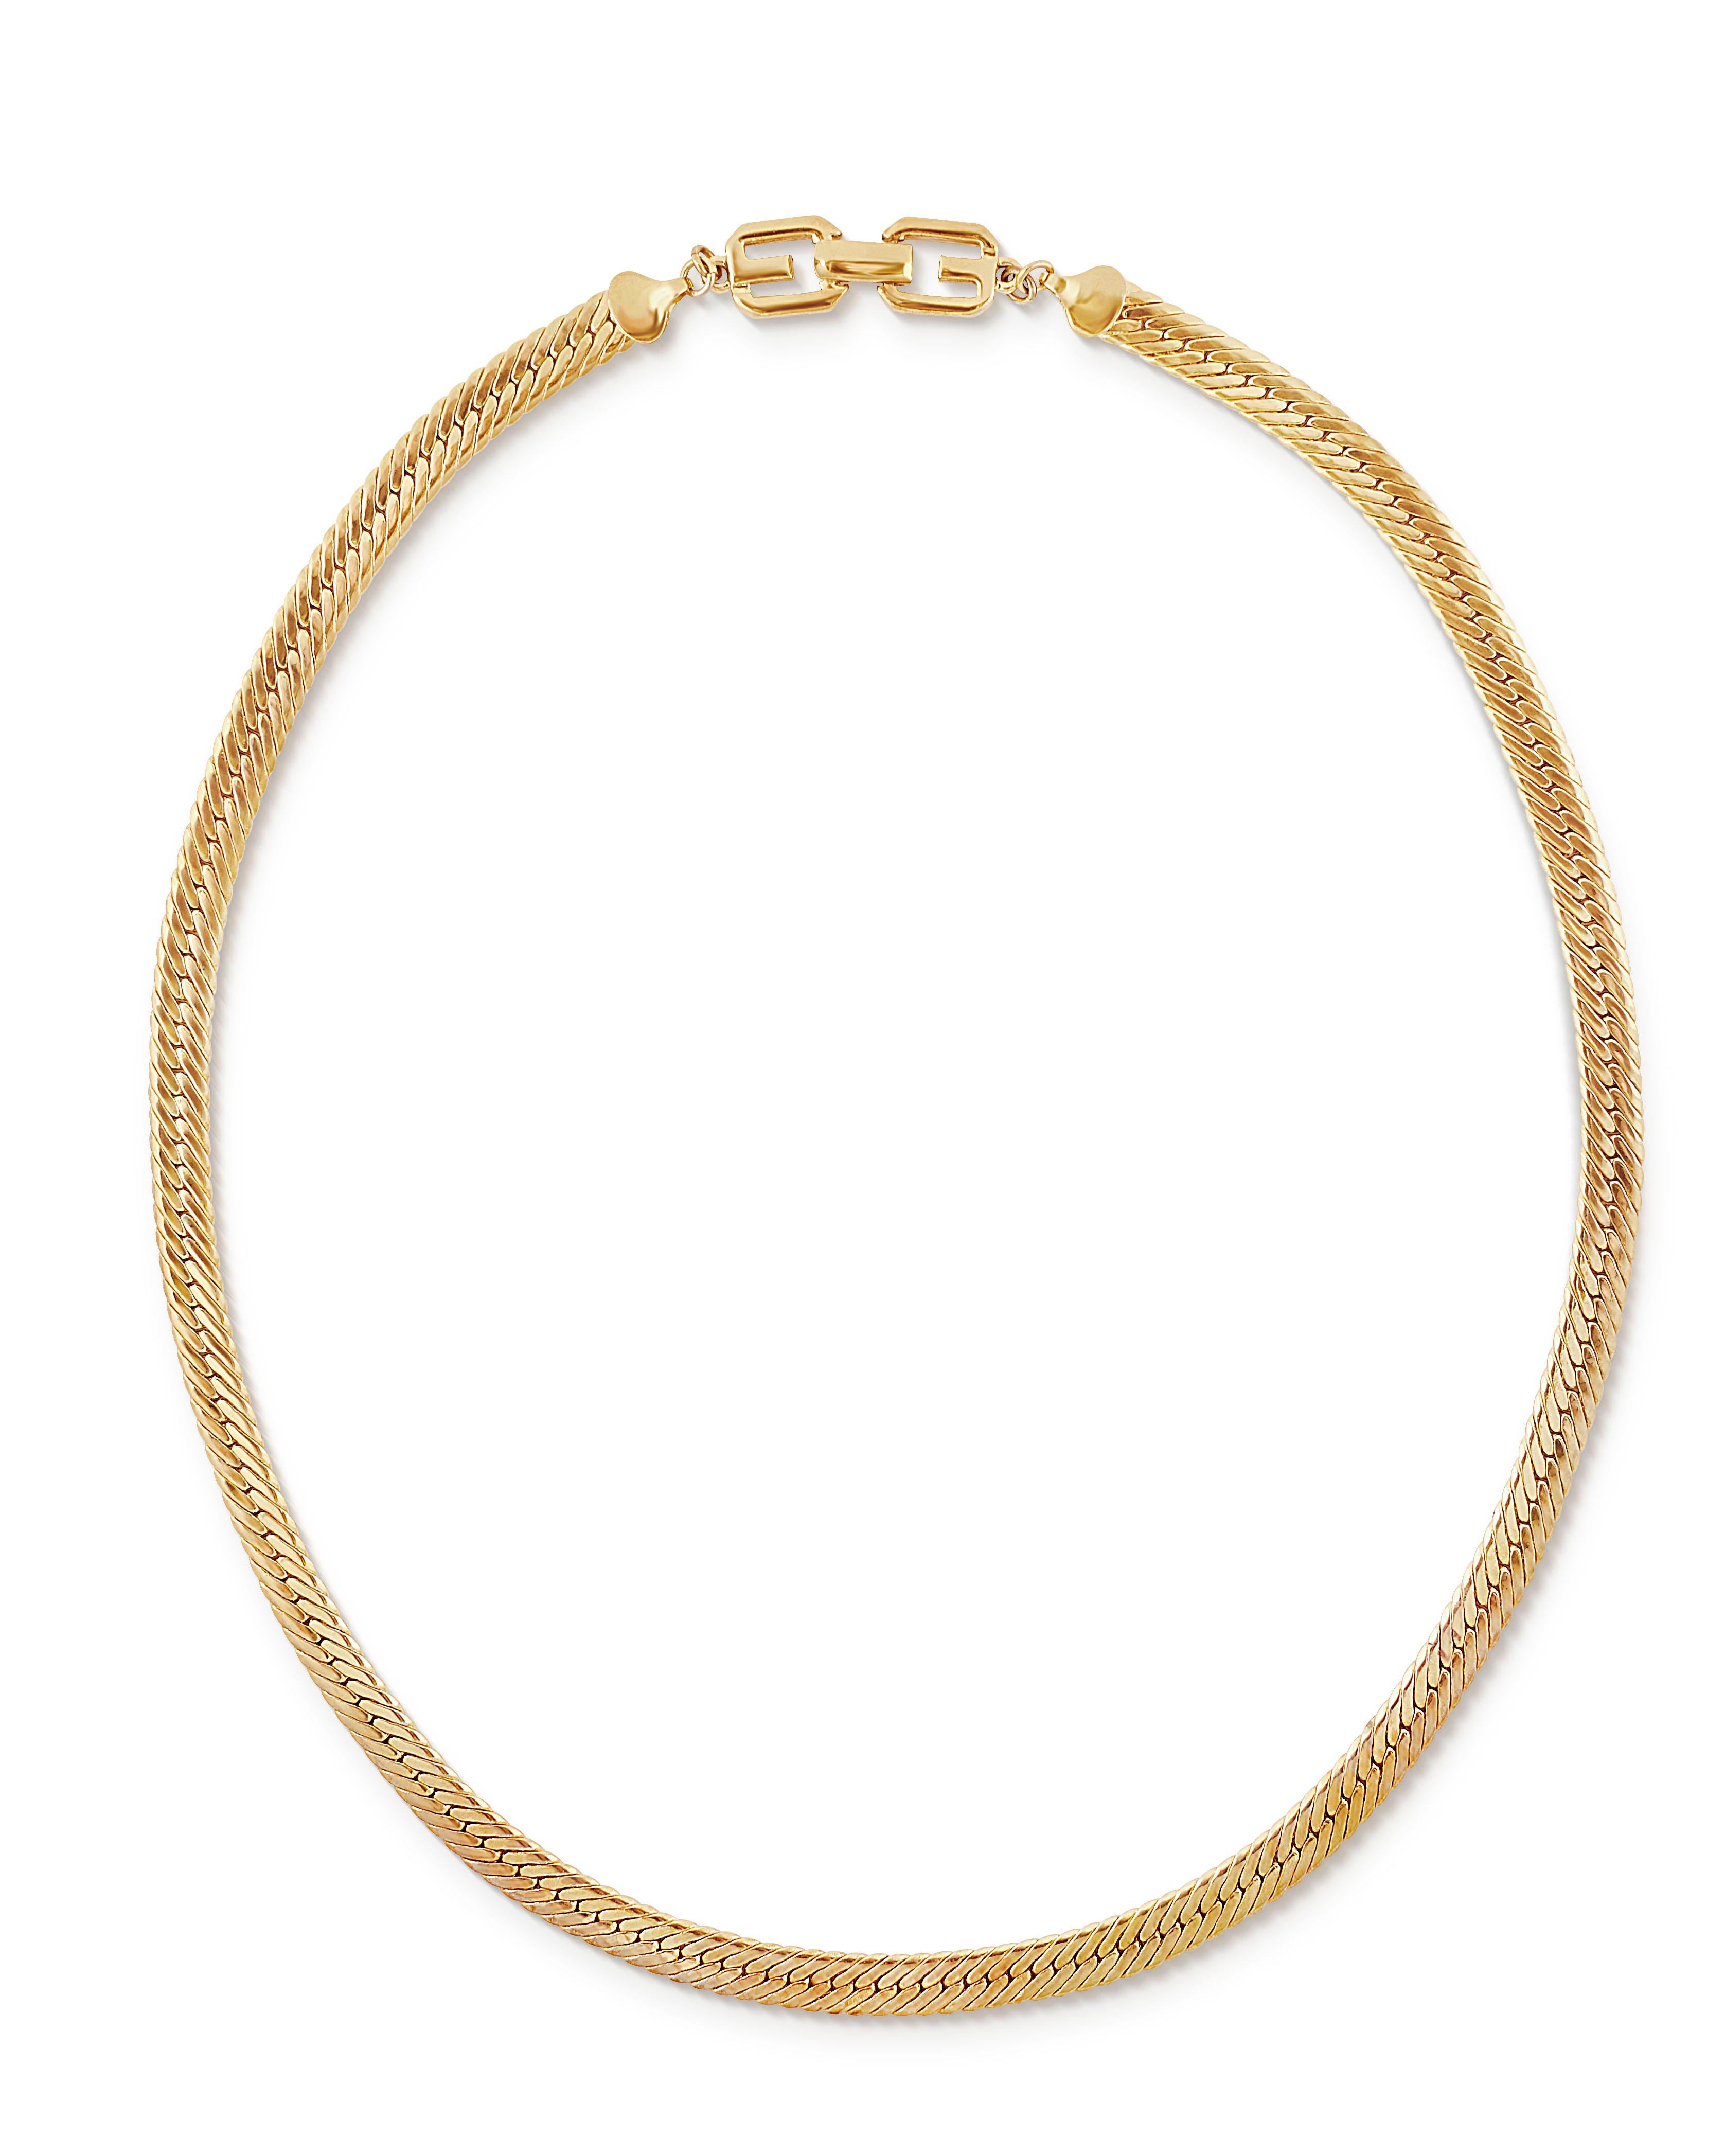 Vintage 1980s Givenchy herringbone chain necklace in gold plate.  This long heritage necklace comprises a flat, wide herringbone chain with a statement double G logo clasp.  Length 26 inches, width just over 1/4 inch with a foldover clasp closure at